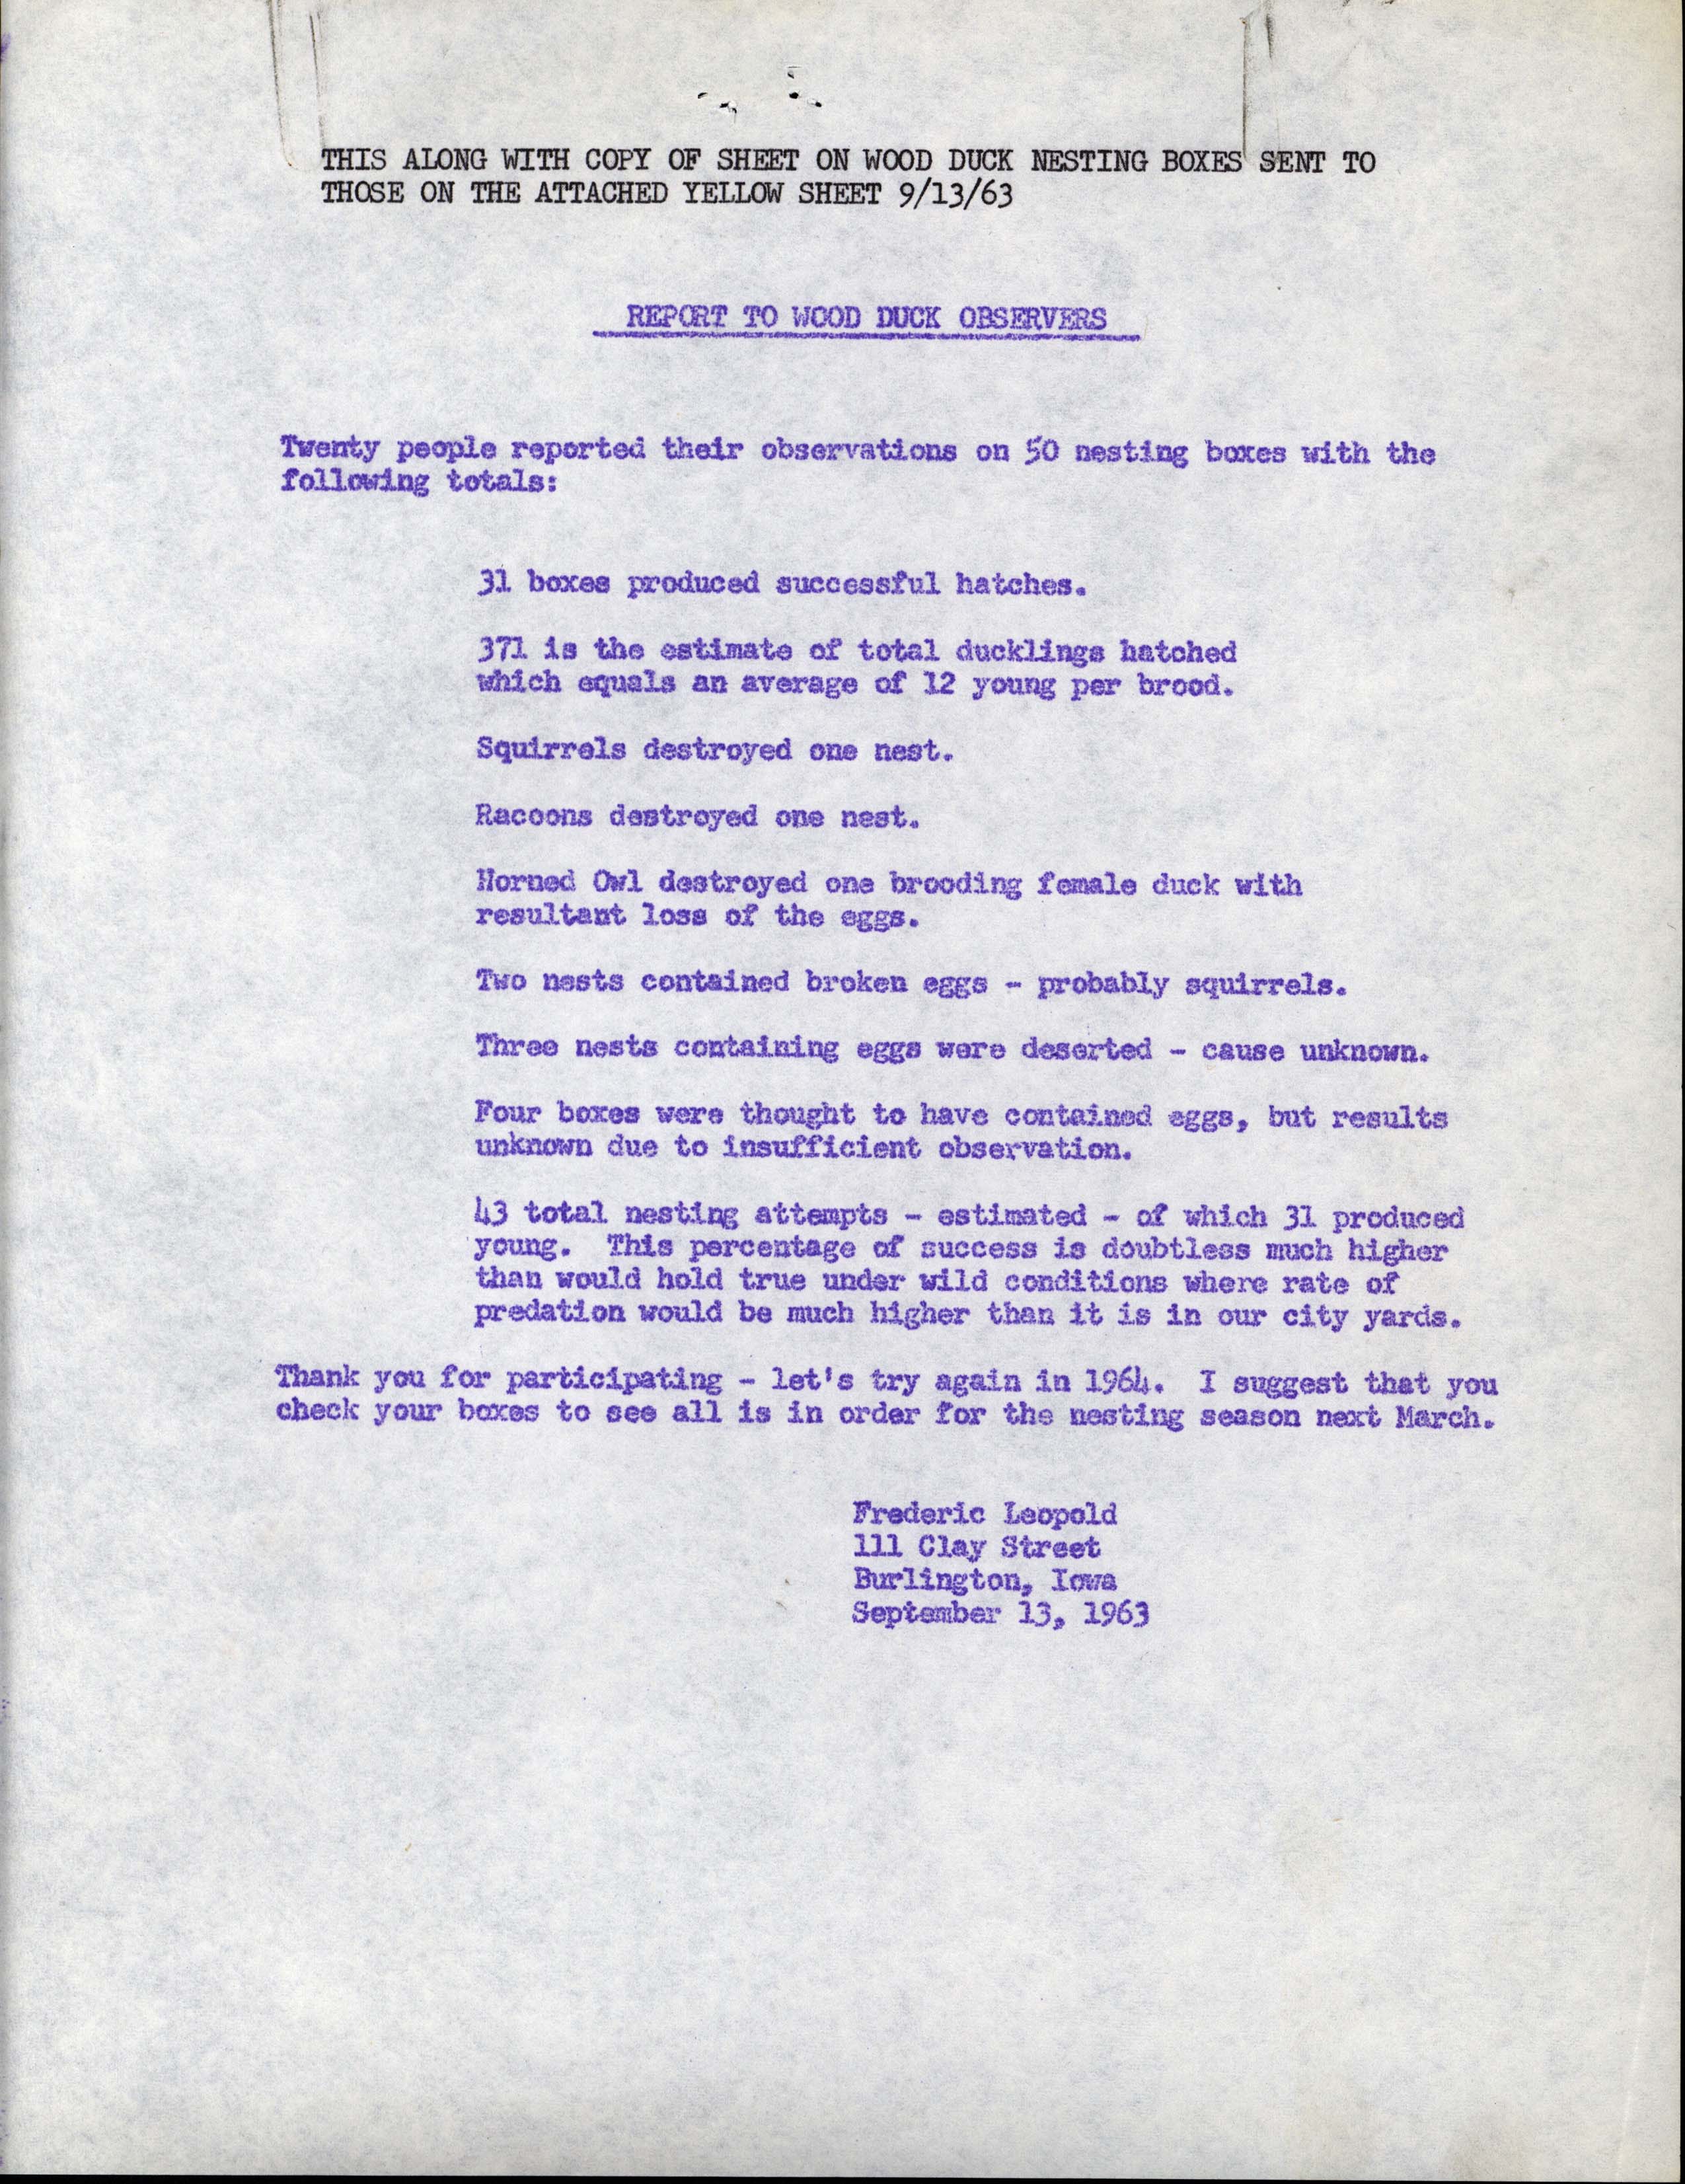 Report to Wood Duck observers with attached mailing list, September 13, 1963